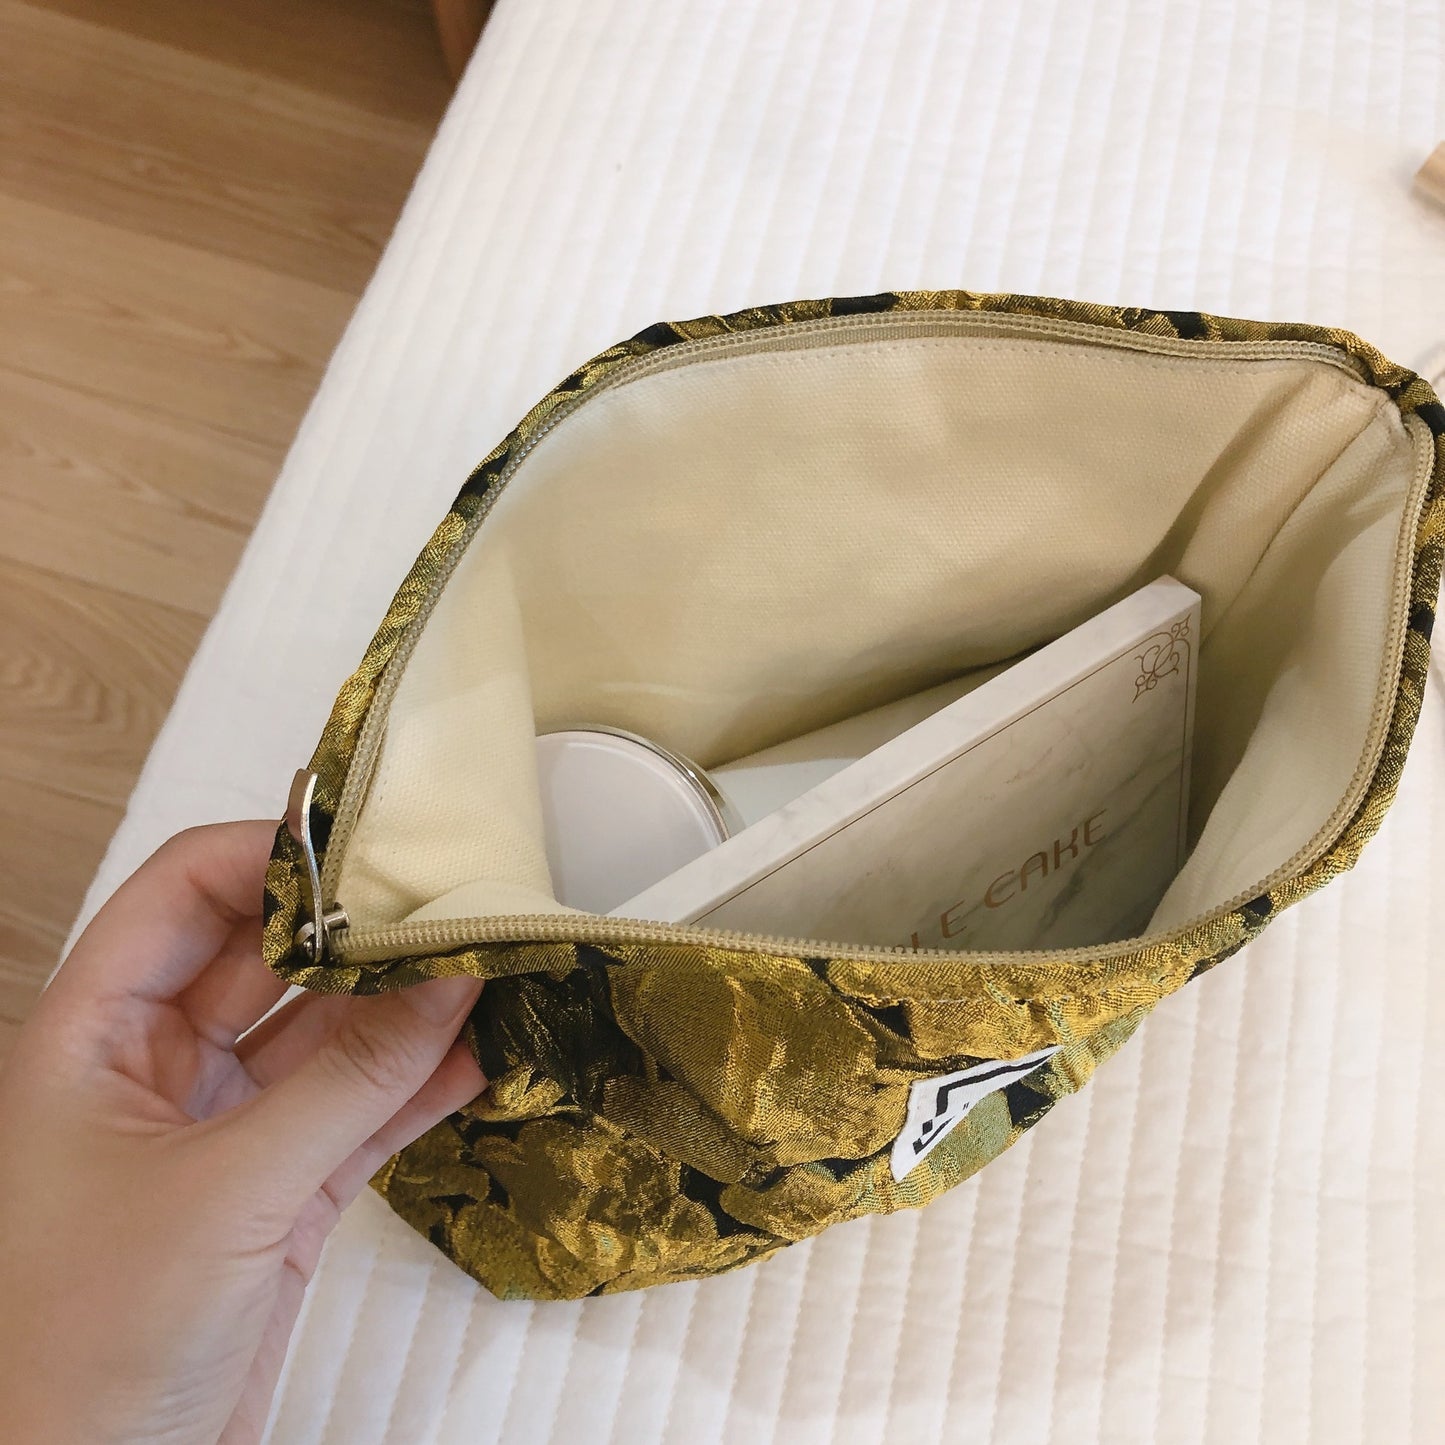 Floral Cosmetic Pouch